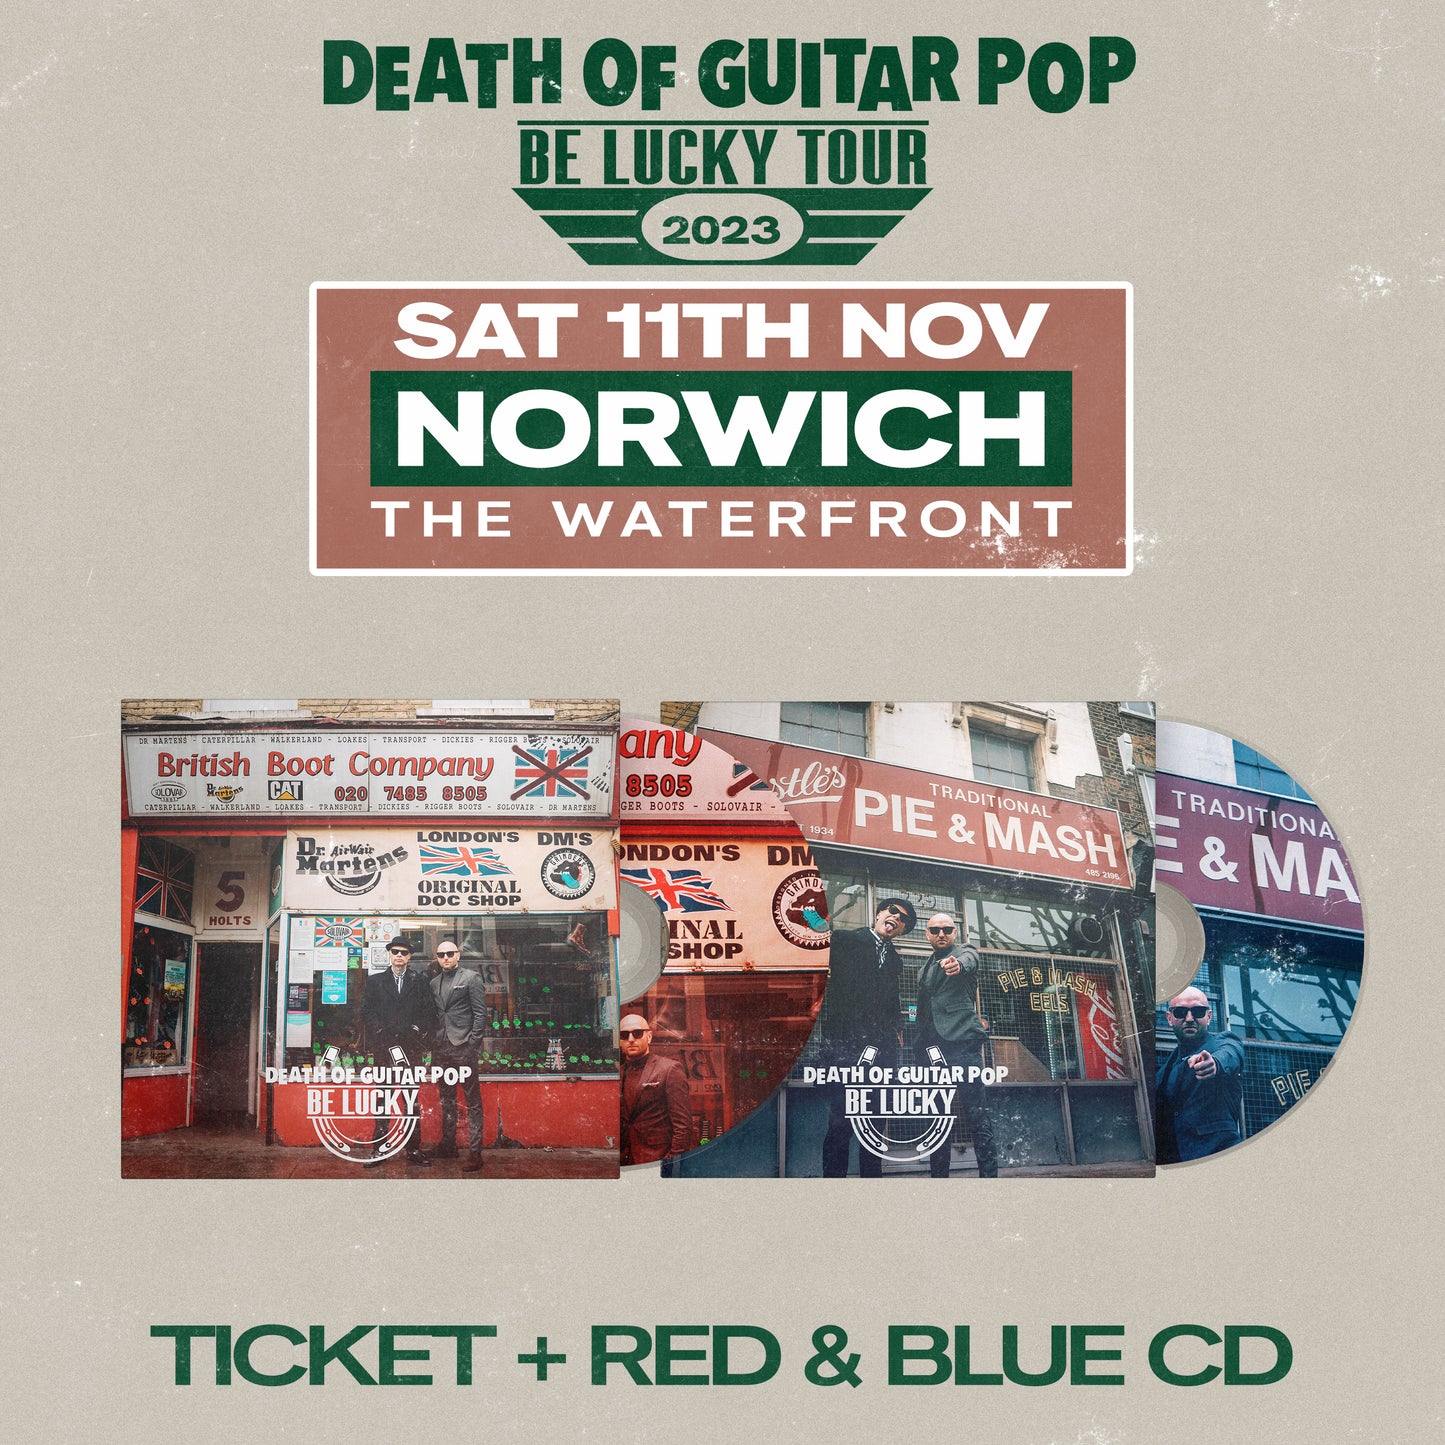 NORWICH - THE WATERFRONT 11/11/23 - GENERAL ADMISSION + RED & BLUE CD BUNDLE